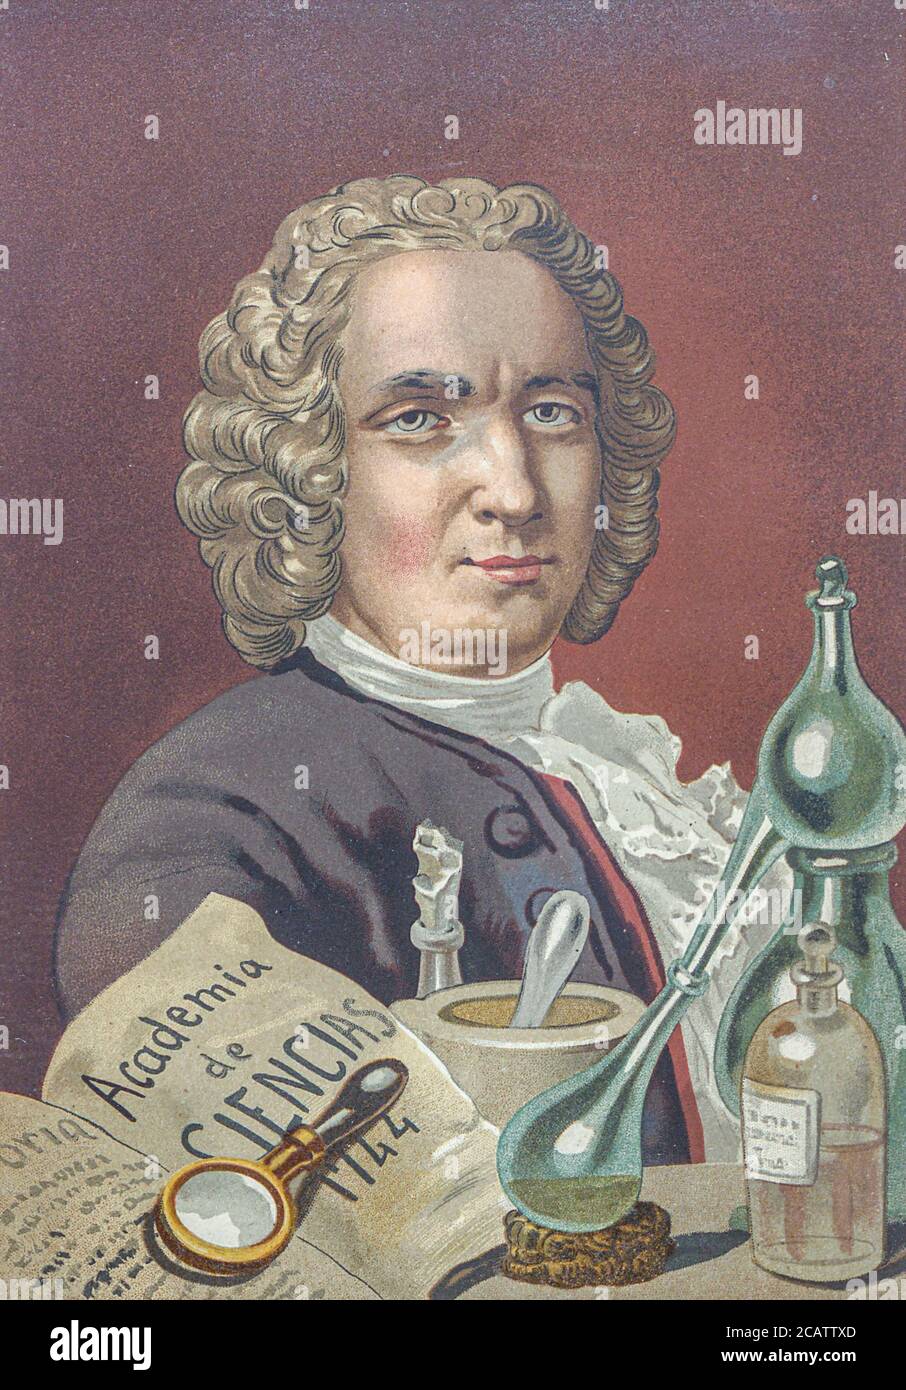 Guillaume François Rouelle (15 September 1703 – 3 August 1770) was a French chemist and apothecary. In 1754 he introduced the concept of a base into chemistry, as a substance which reacts with an acid to give it solid form (as a salt). From the book La ciencia y sus hombres : vidas de los sabios ilustres desde la antigüedad hasta el siglo XIX T. 3  [Science and its men: lives of the illustrious sages from antiquity to the 19th century Vol 3] By by Figuier, Louis, (1819-1894); Casabó y Pagés, Pelegrín, n. 1831 Published in Barcelona by D. Jaime Seix, editor , 1879 (Imprenta de Baseda y Giró) Stock Photo